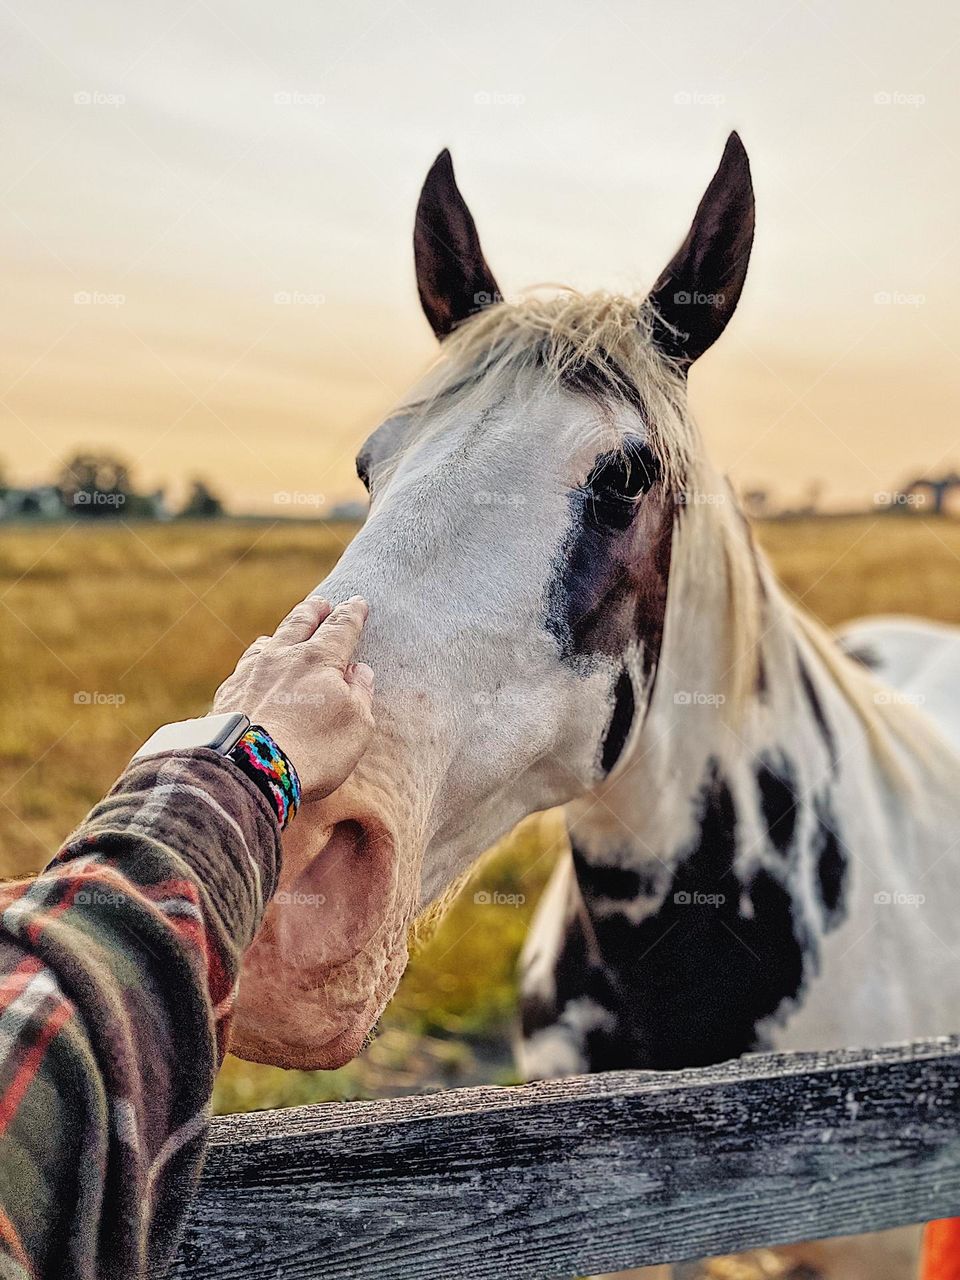 Woman reached out to pet horse, finding peace in the quiet time with horses, finding joy with animals, horses bringing calm to life, early morning meditation in the fields 